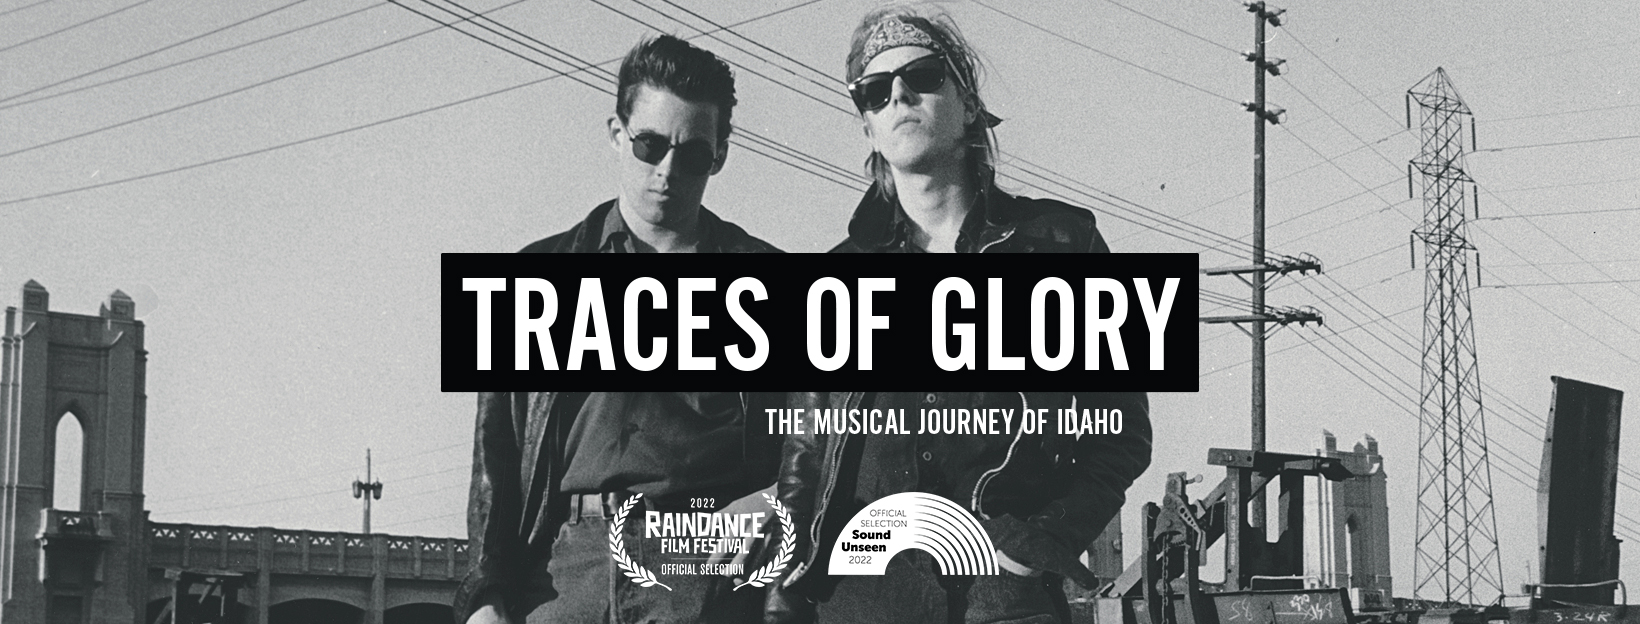 Traces of Glory - The Musical Journey of IDAHO